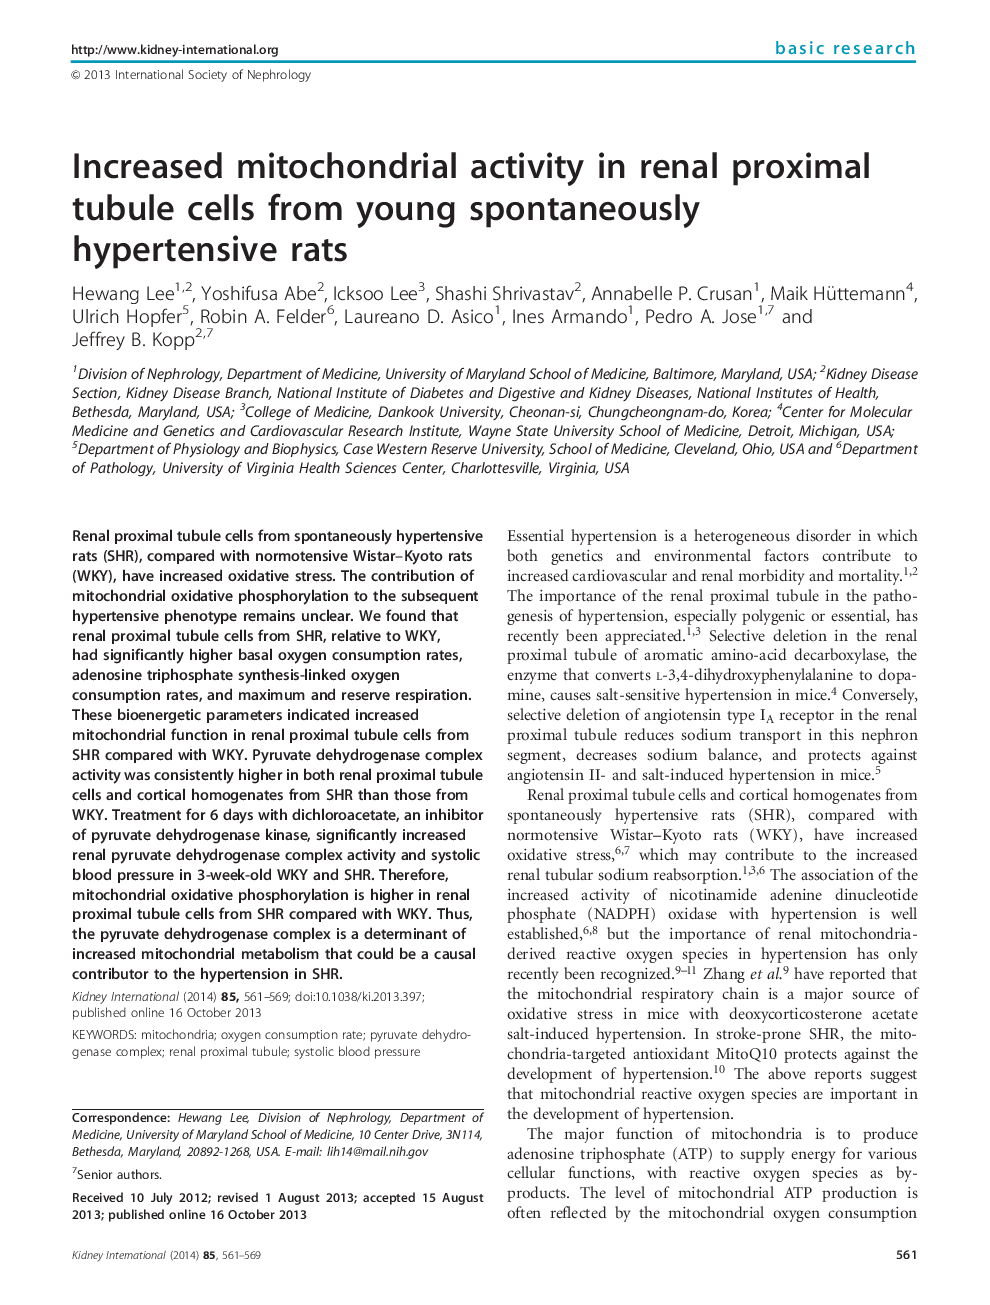 Increased mitochondrial activity in renal proximal tubule cells from young spontaneously hypertensive rats